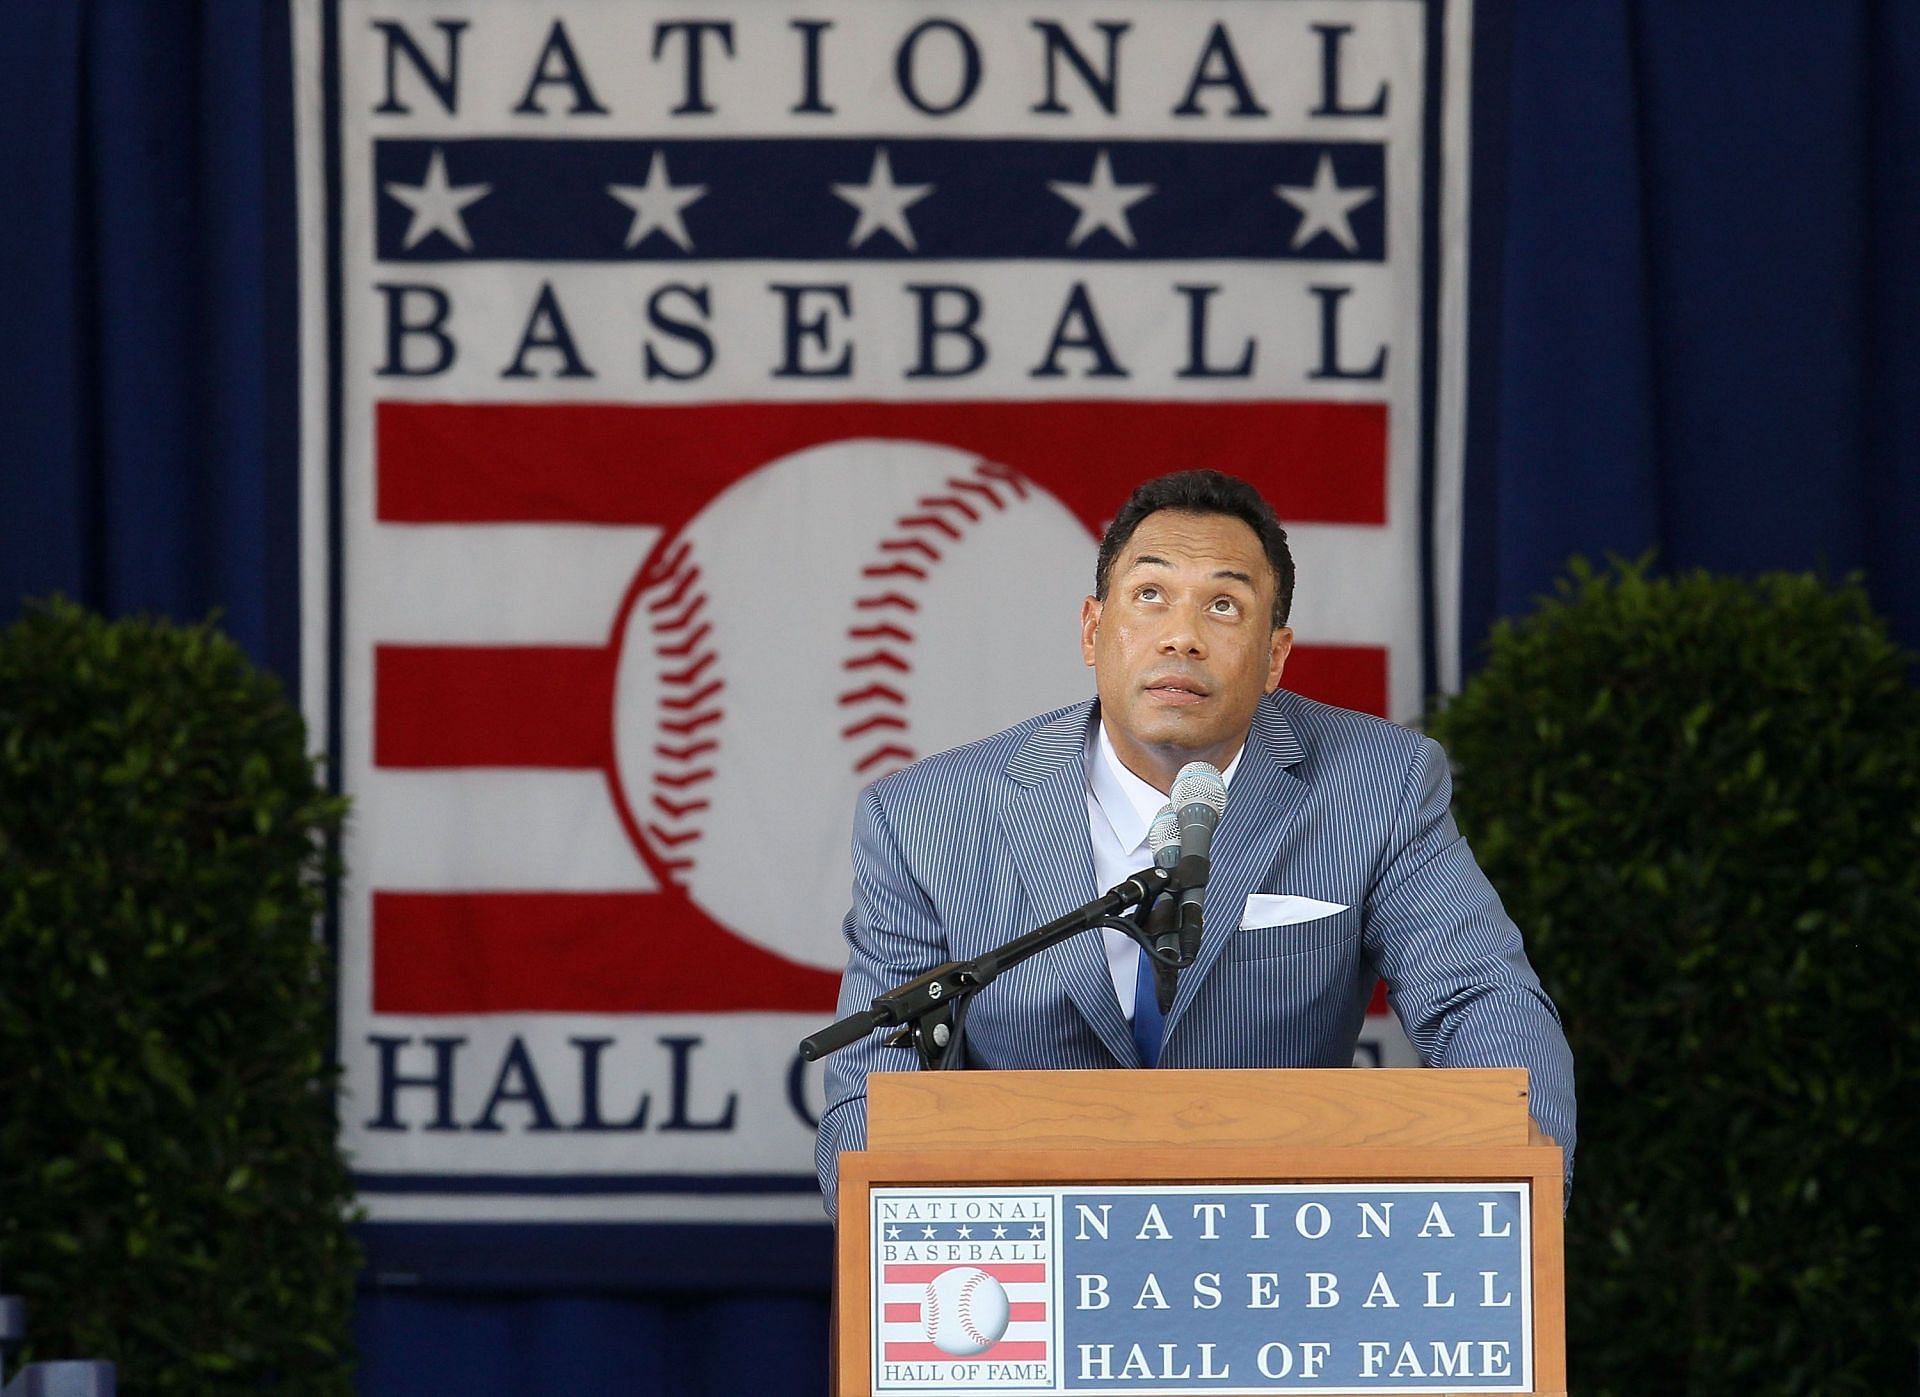 2011 Baseball Hall of Fame Induction Ceremony COOPERSTOWN, NY - JULY 24: Roberto Alomar gives his speech at Clark Sports Center during the Baseball Hall of Fame induction ceremony on July 24, 2011 in Cooperstown, New York. In 17 major league seasons, Alomar tallied 2,724 hits, 210 home runs, 1,134 RBI, a .984 fielding percentage and a .300 batting average. (Photo by Jim McIsaac/Getty Images)